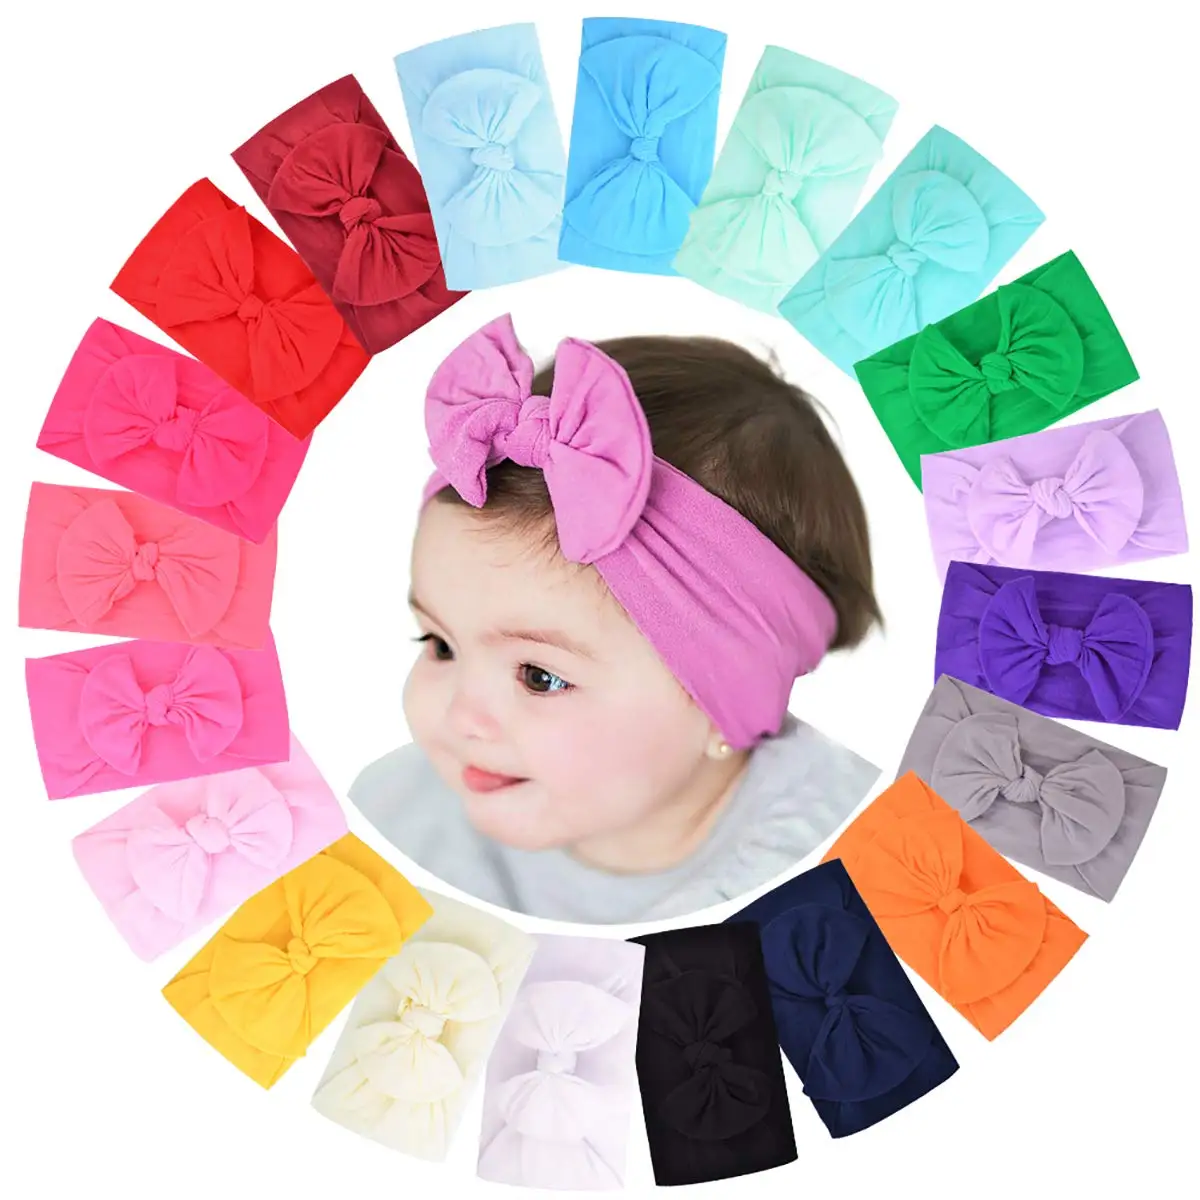 Cloth Hat For Newborn Headdress Multi Color Fabric Soft Headband Hair Band  Hair Accessories Headwear For Baby Girl Kid Children - Buy Baby Headband,Fold  Cotton Headband,Hair Accessories For Baby Product on Alibaba.com